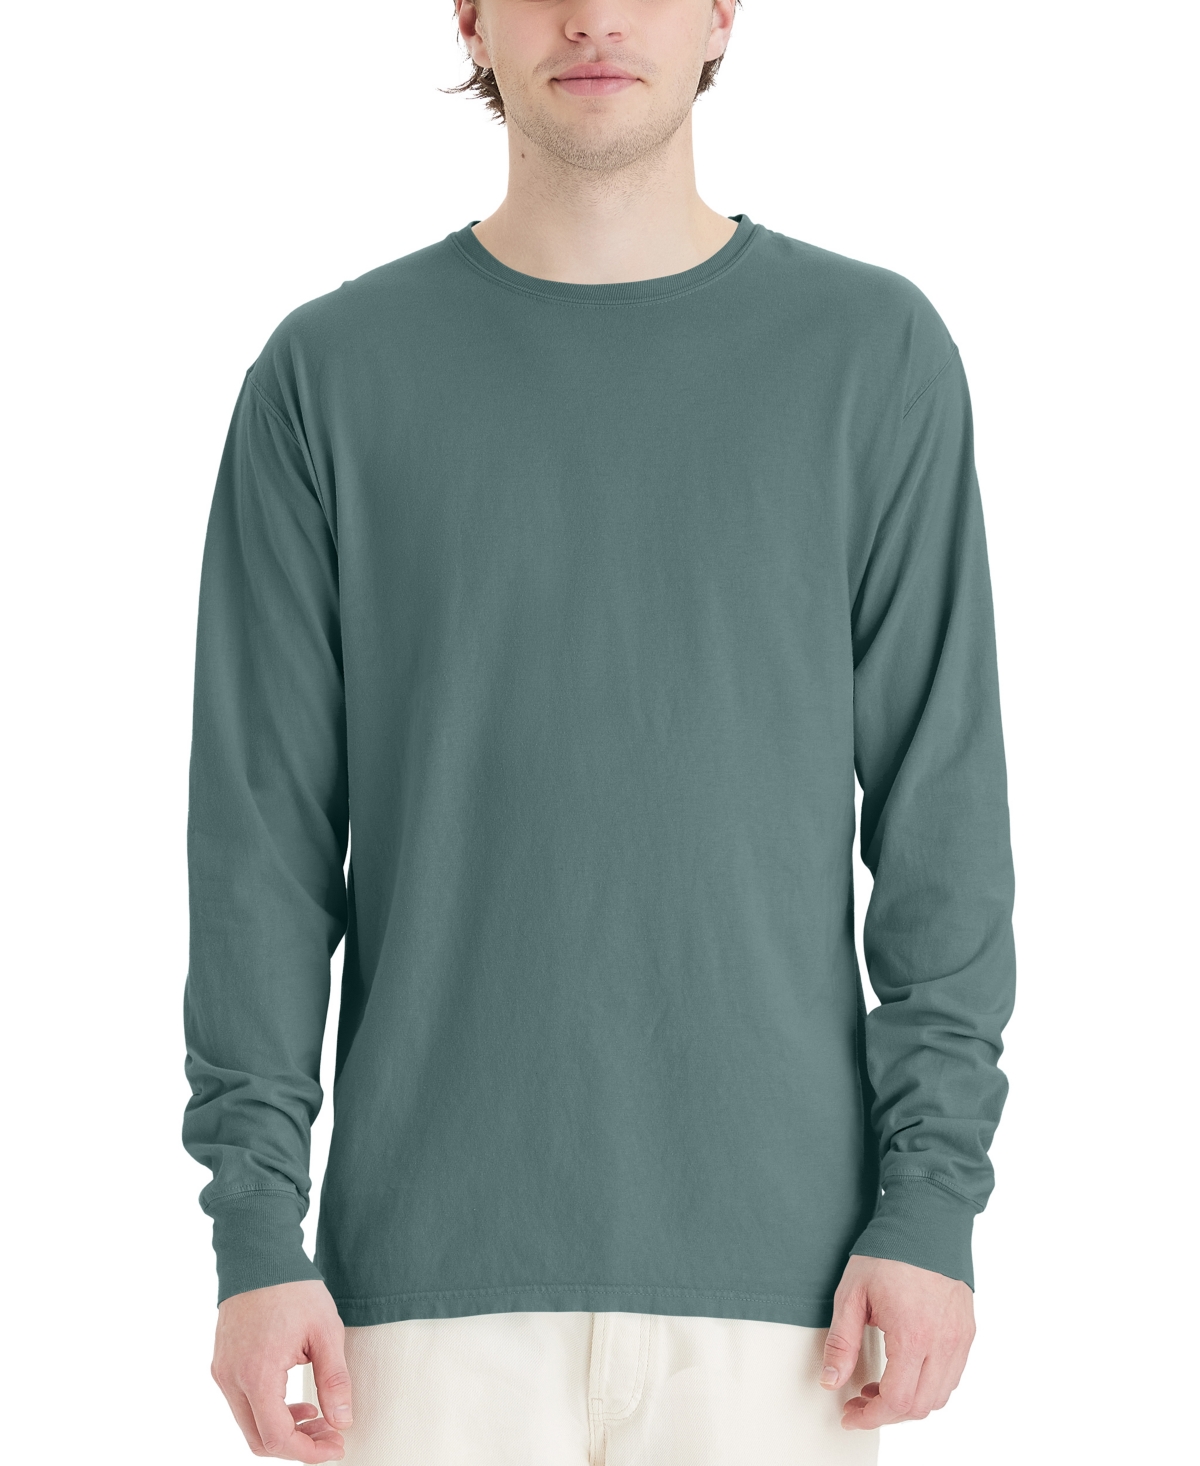 Hanes Unisex Garment Dyed Long Sleeve Cotton T-shirt In Green